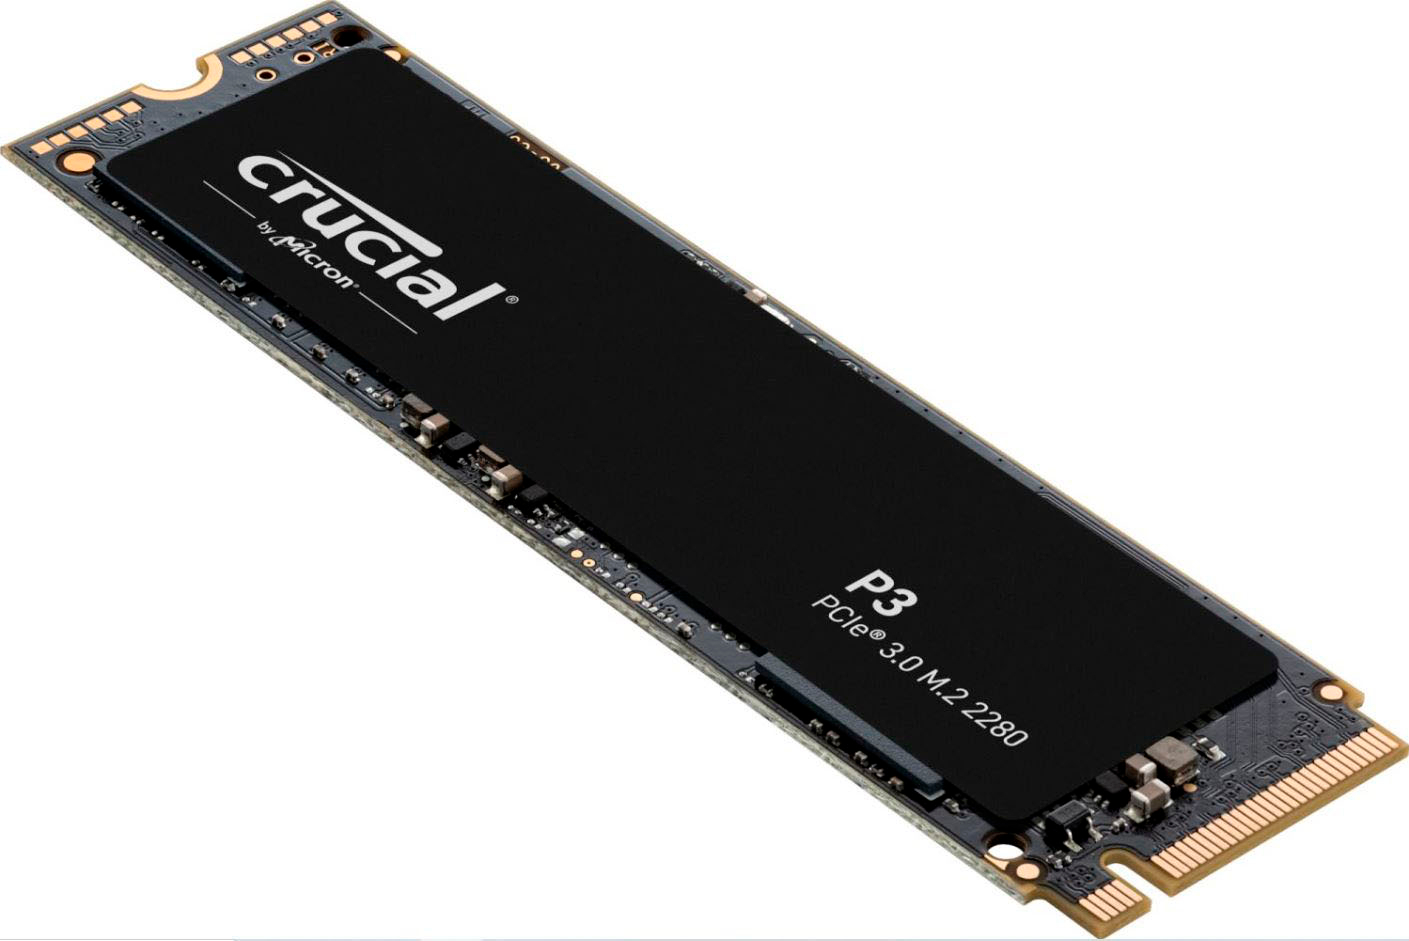 Crucial P3 - 4 To - Disque SSD Crucial sur